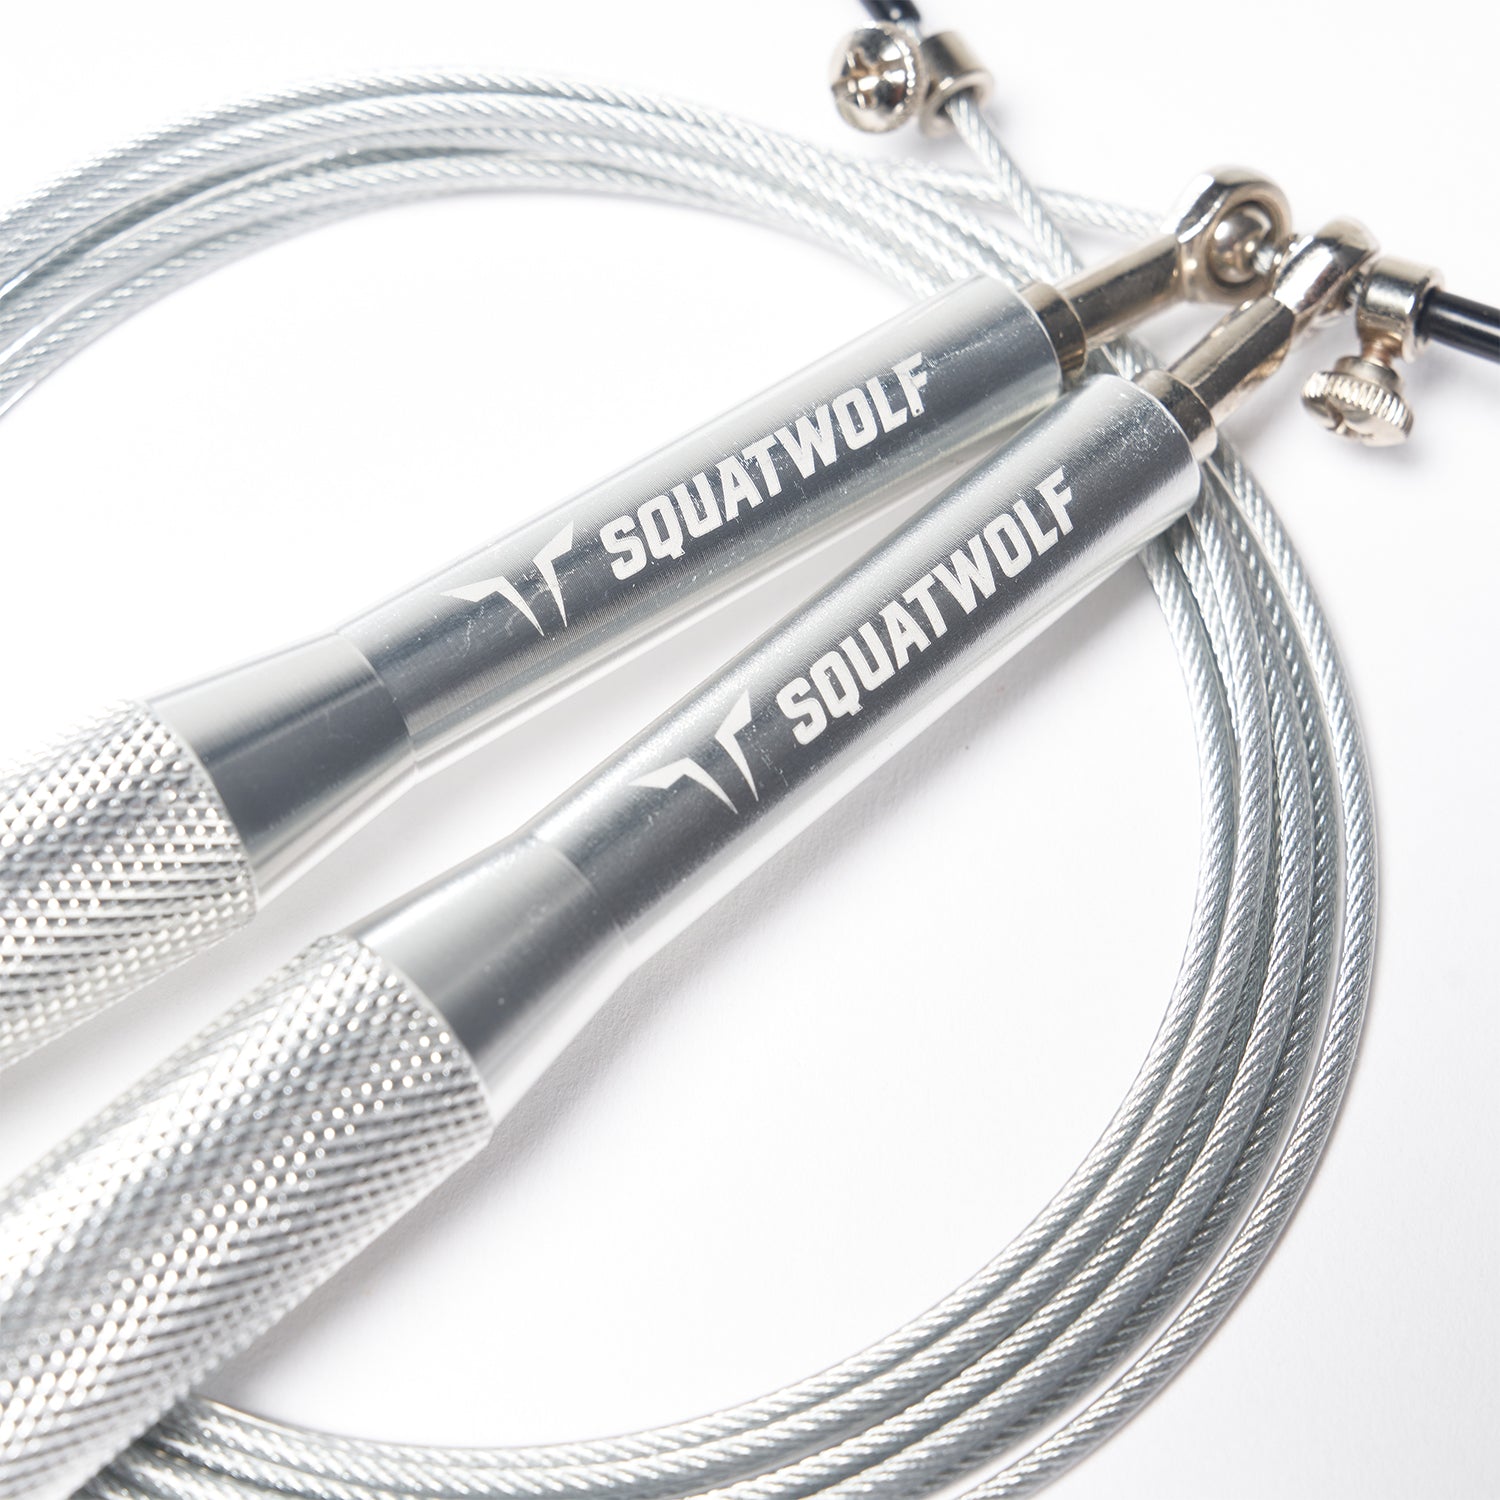 squatwolf-gym-wear-squatwolf-skipping-rope-silver-workout